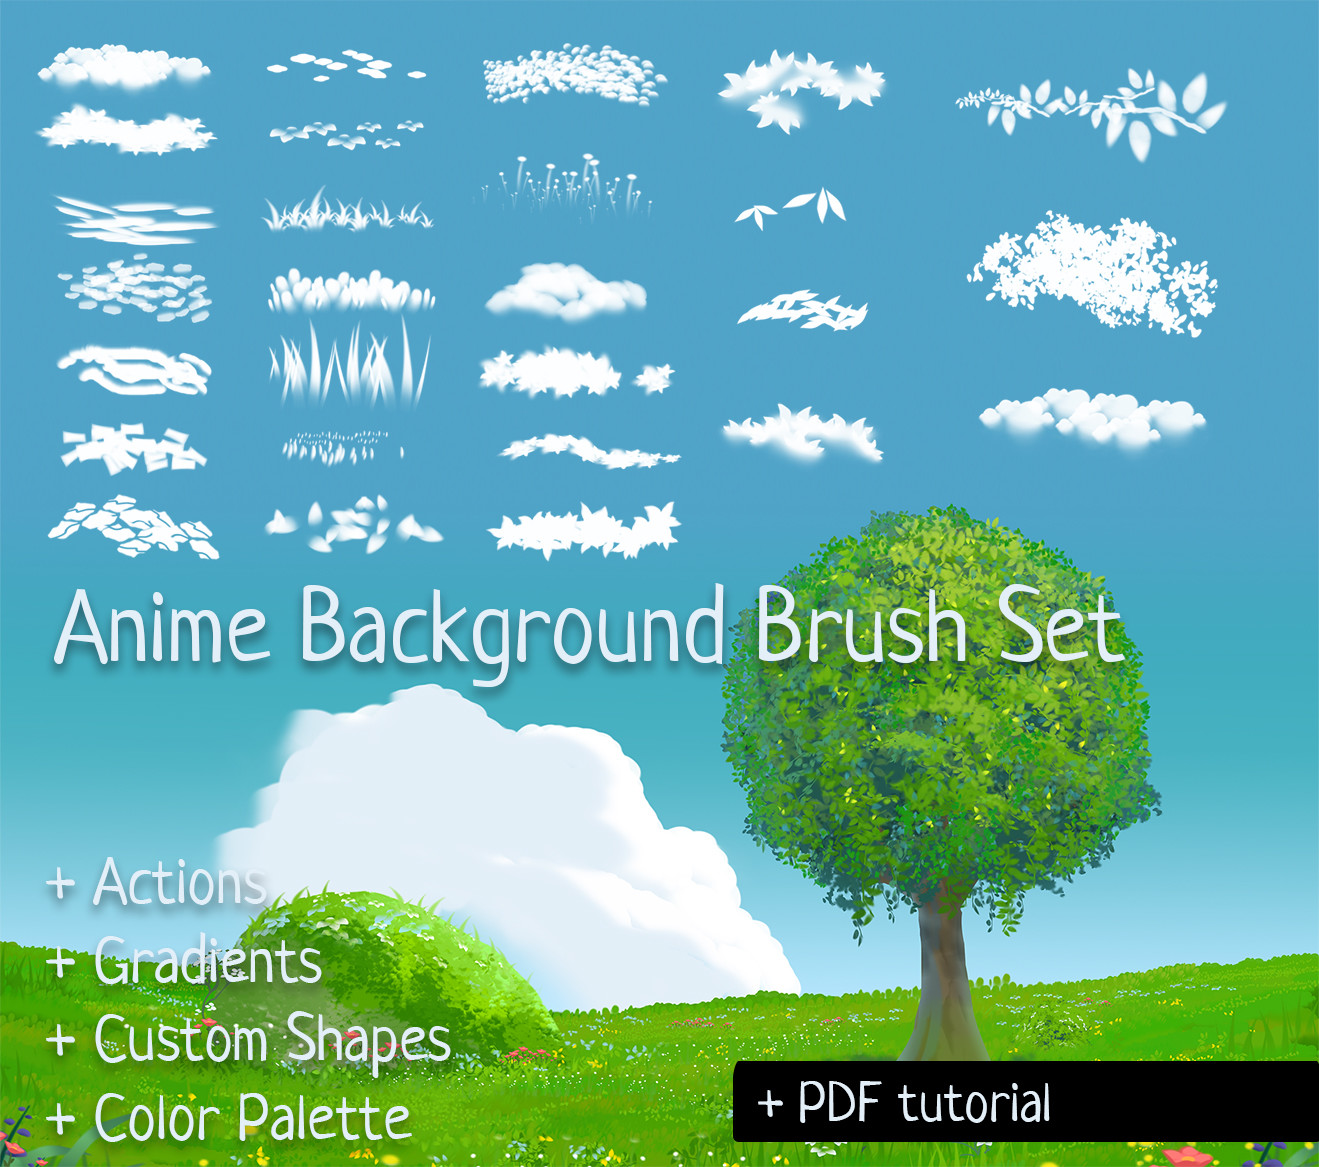 70 Photoshop Brushes For Artists Best Drawing  Painting Brush Packs